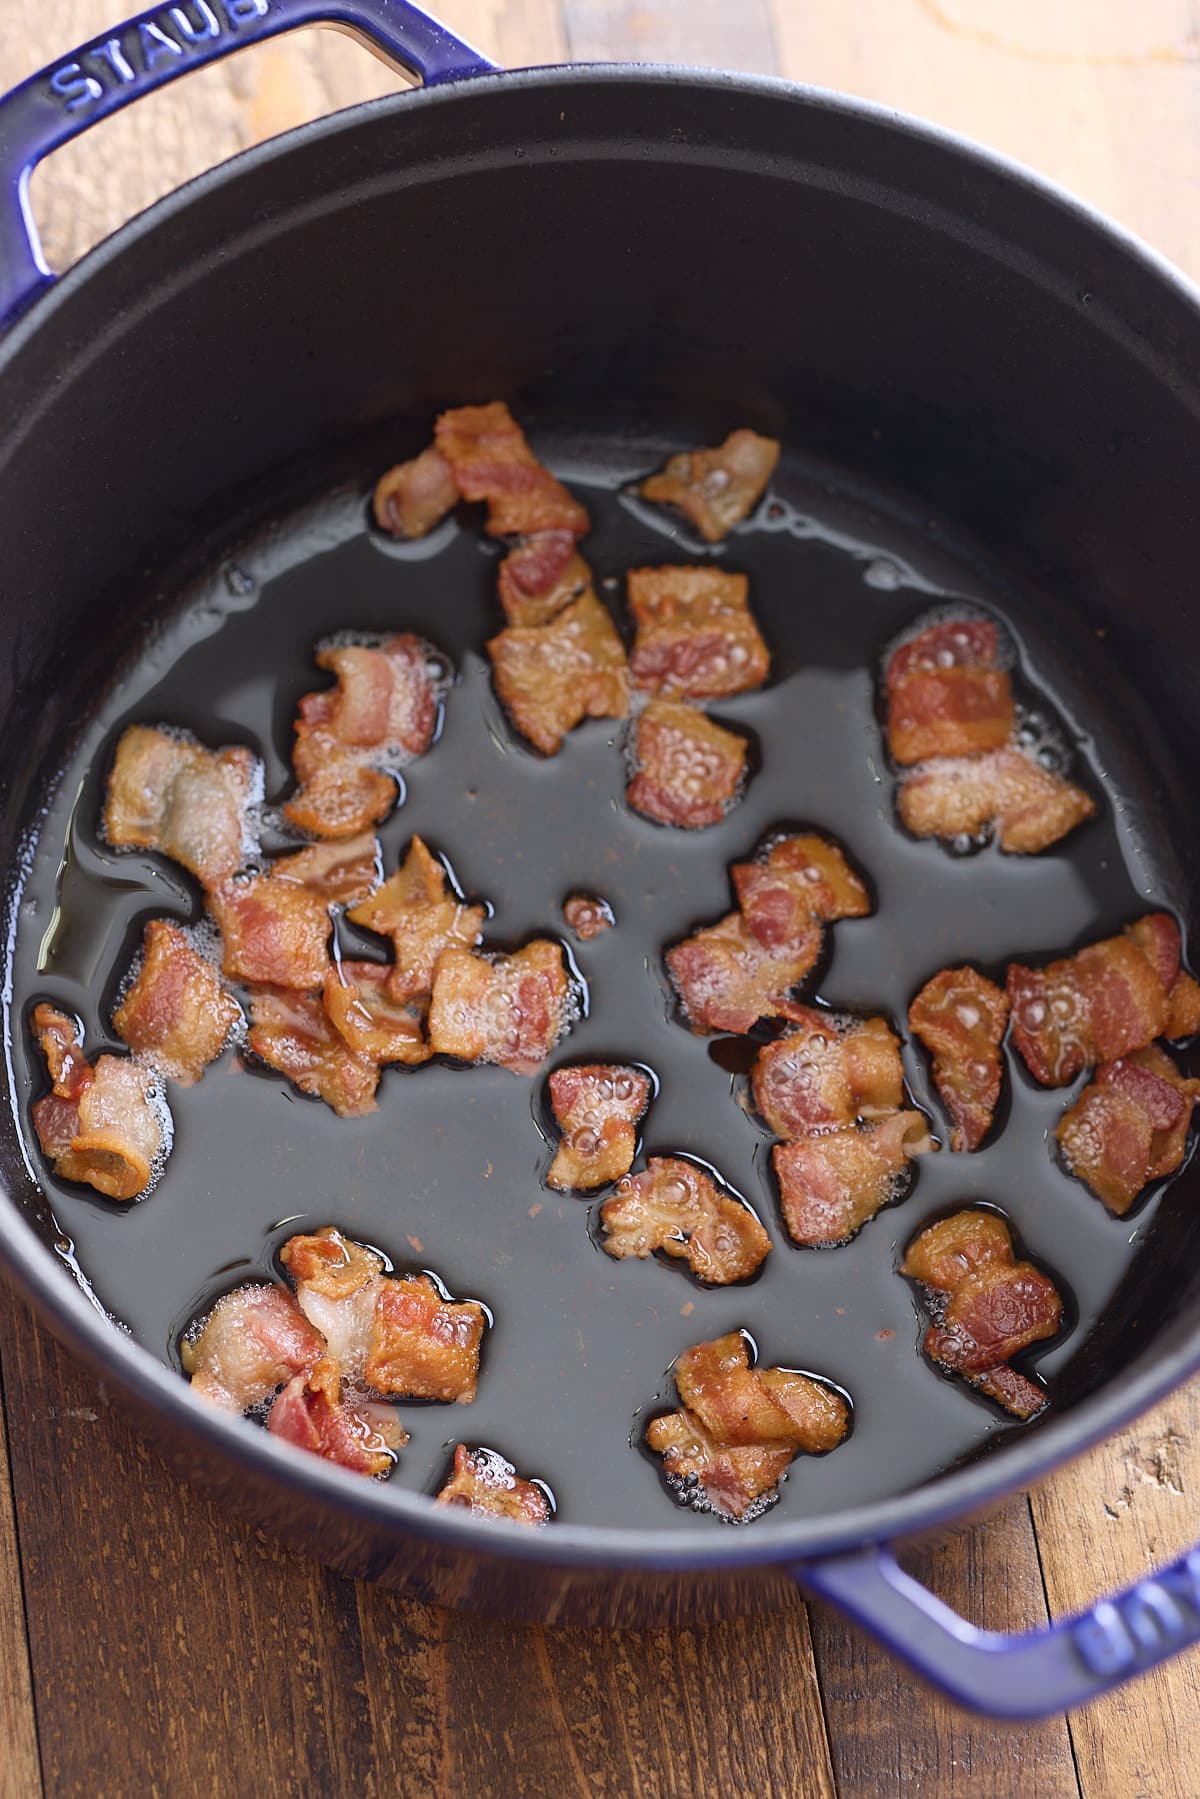 Bacon being fried in a dutch oven.